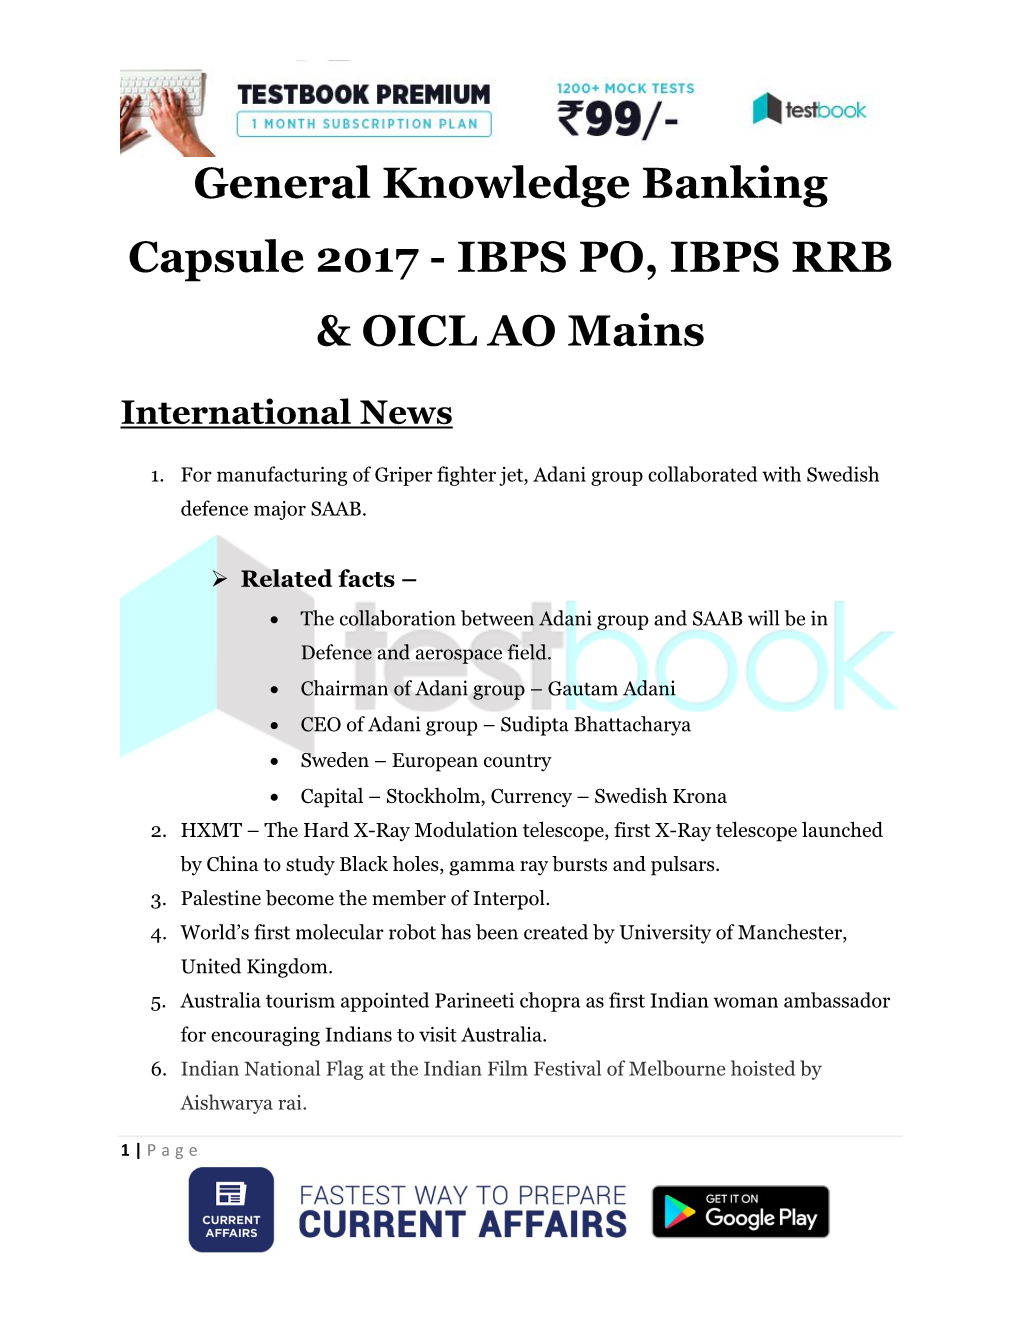 General Knowledge Banking Capsule 2017 - IBPS PO, IBPS RRB & OICL AO Mains